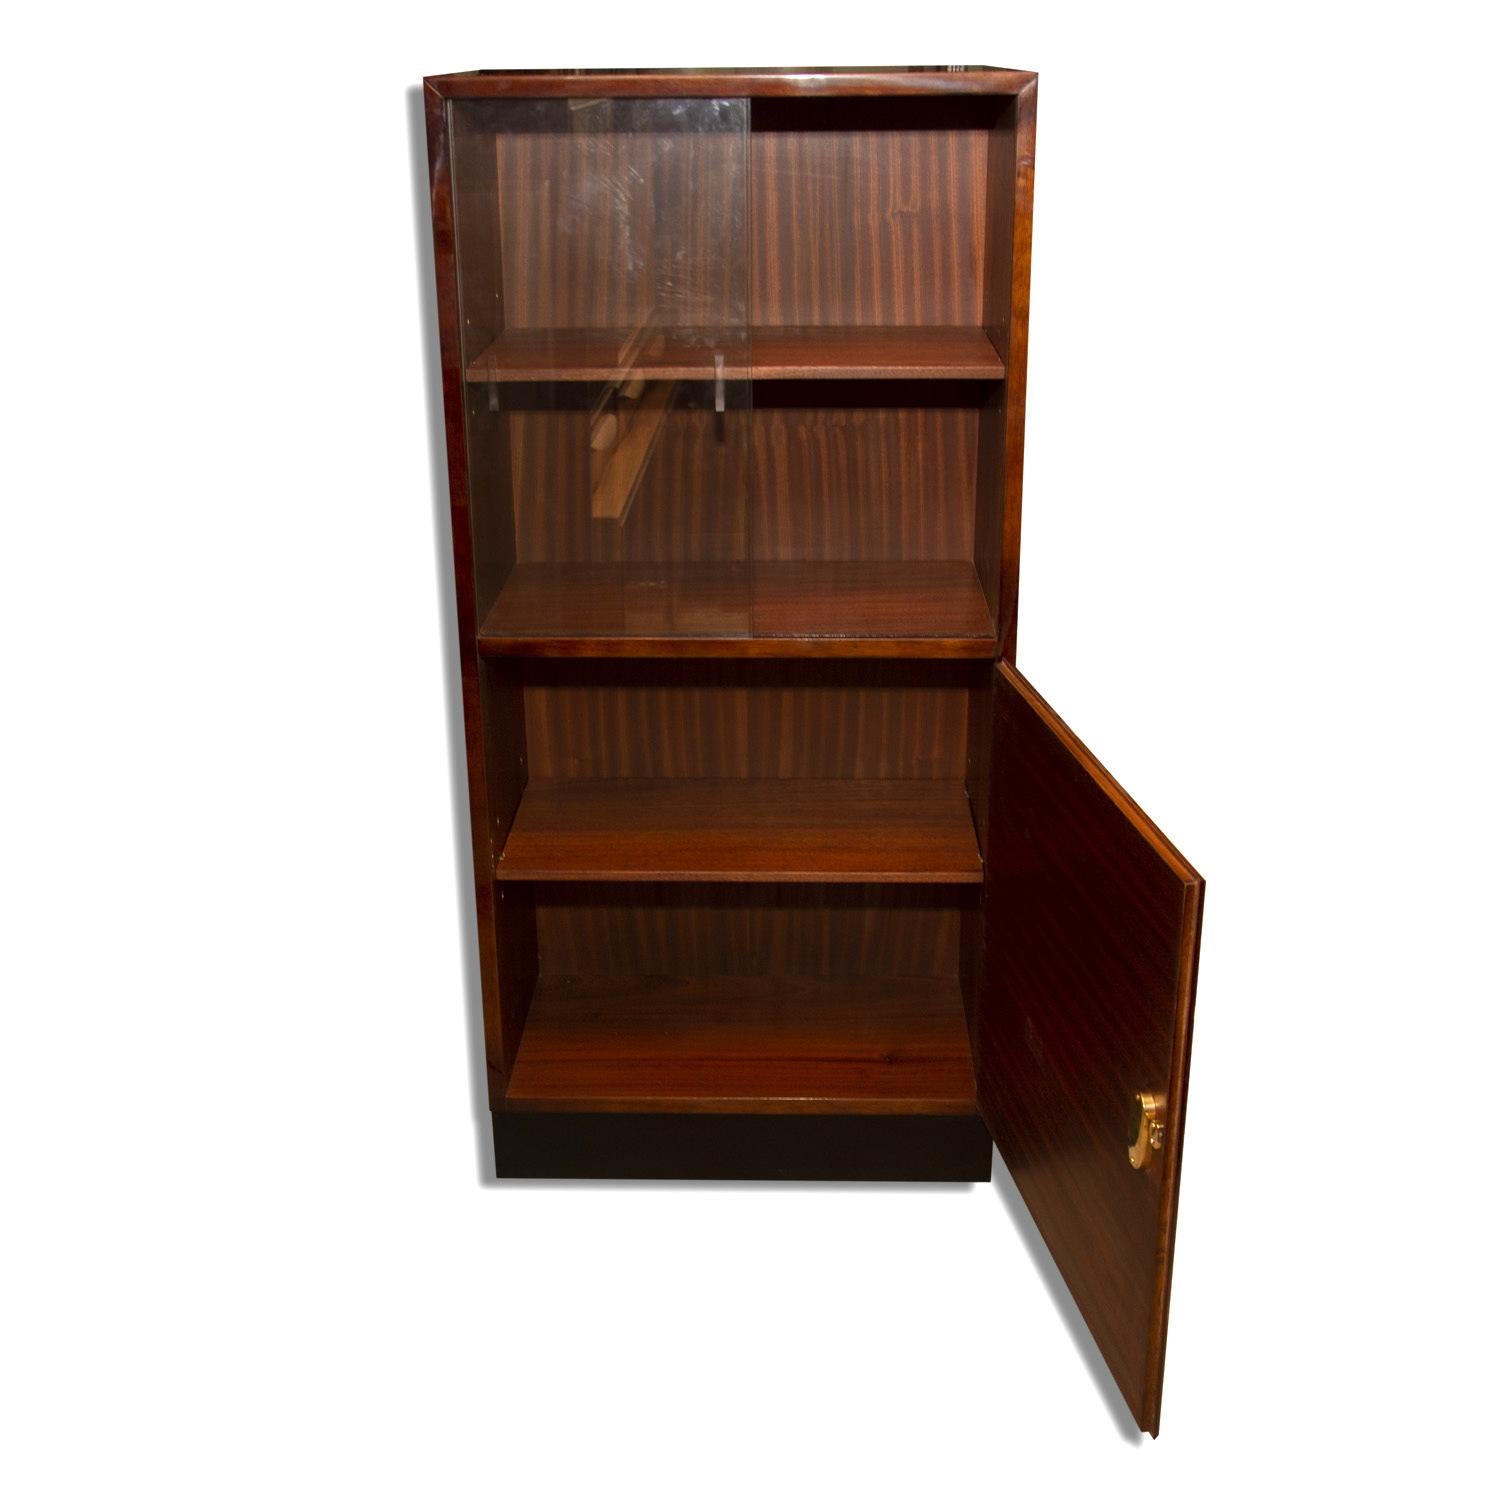 Fully renovated functionalist cabinet, catalogue number H-27. It was made in the 1930s of the last century and was designed by Jindrich Halabala for ÚP Závody Brno. 
Material: wood, walnut veneer. The cabinet was fully restored to a high gloss